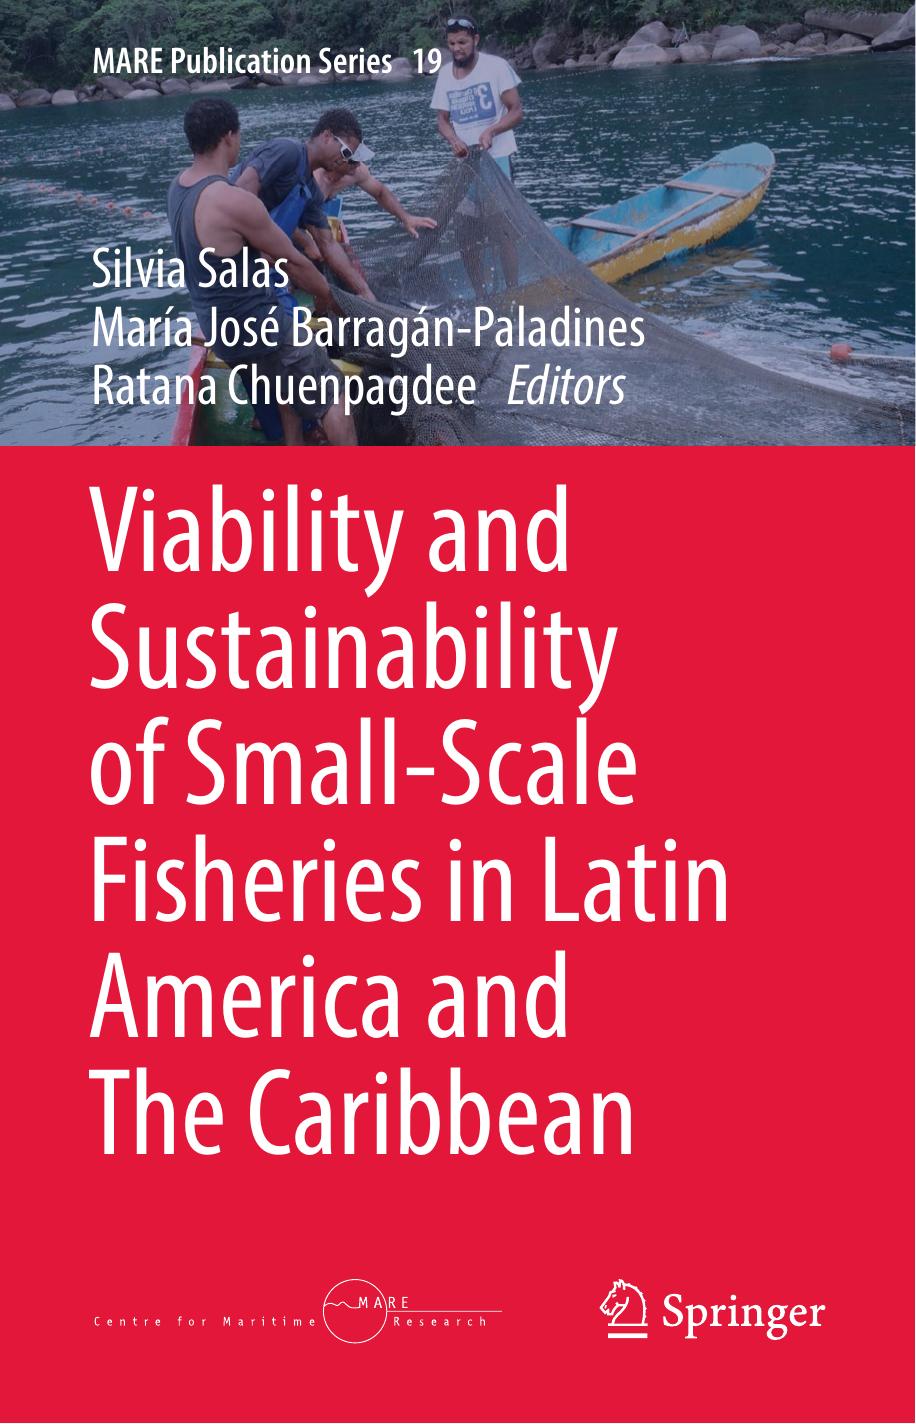 Viability and Sustainability of Small-Scale Fisheries in Latin America and The Caribbean-Springer Interna 2019